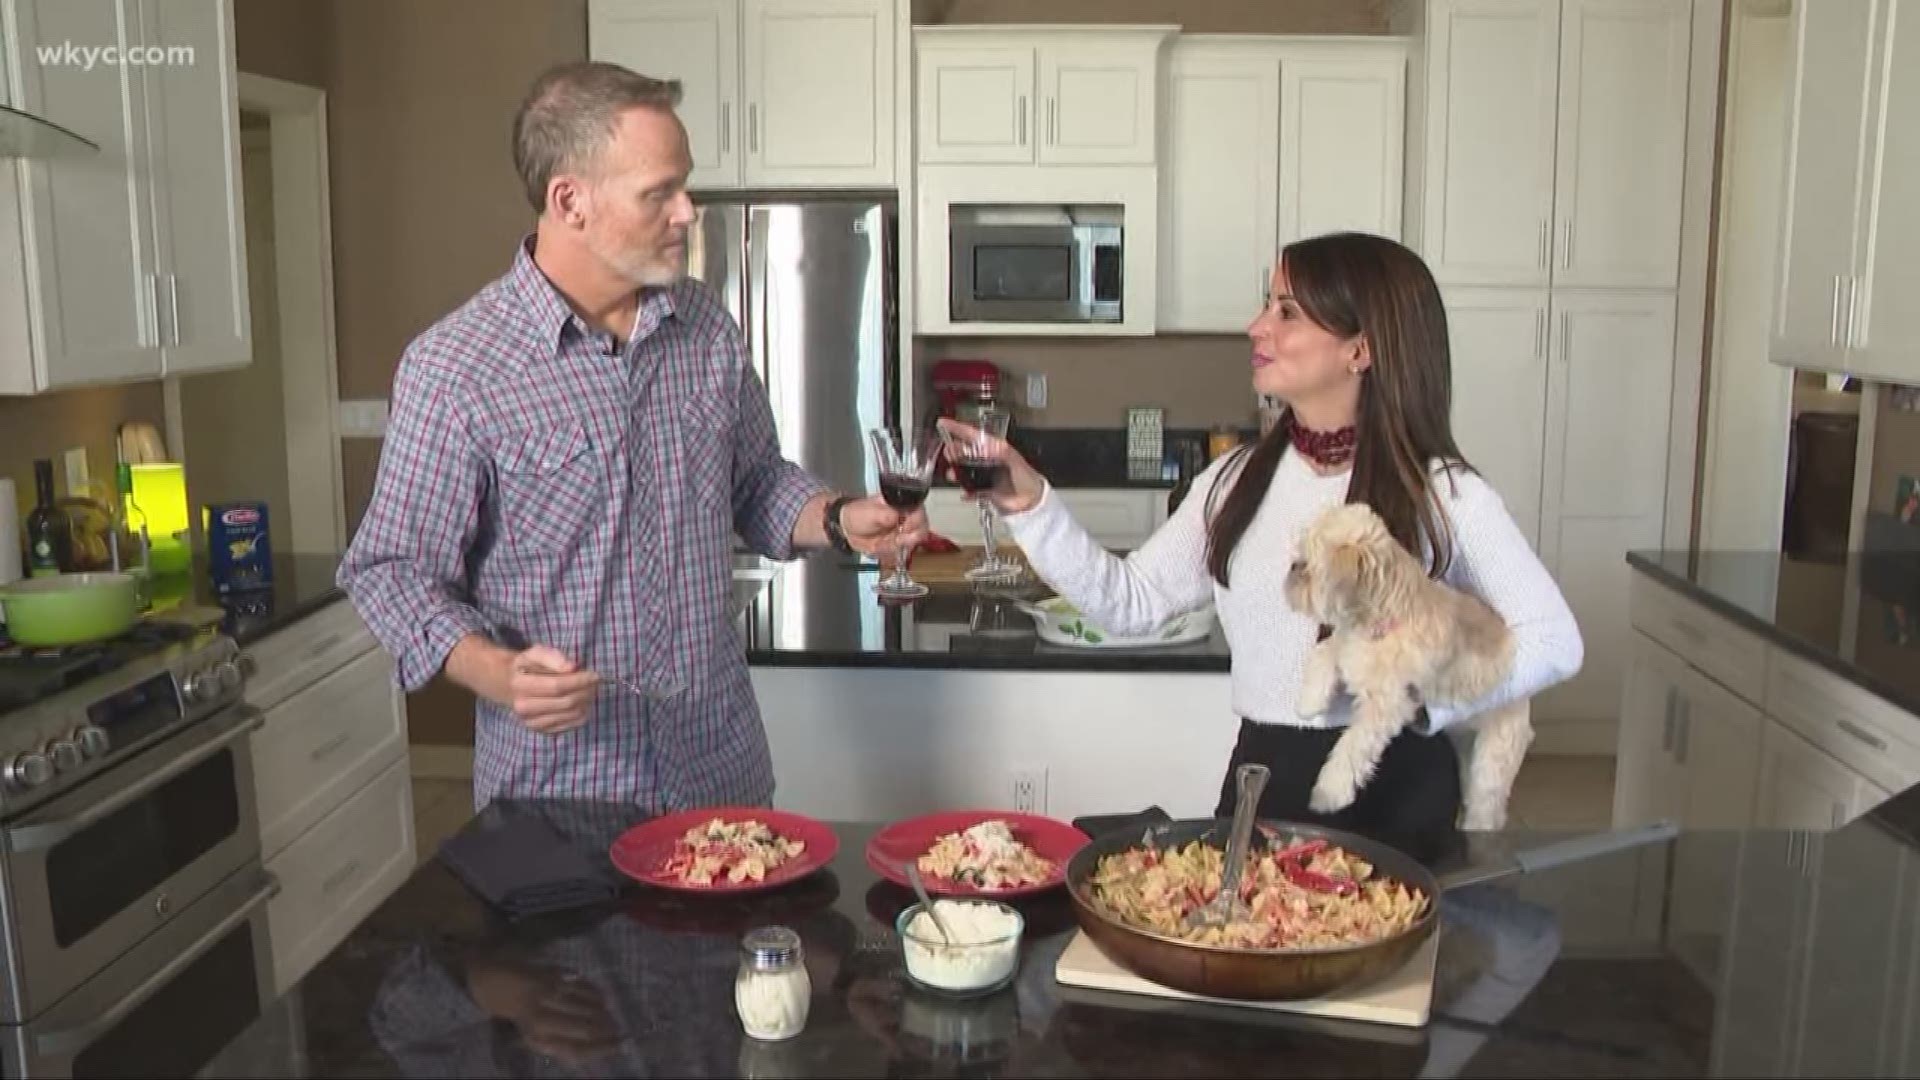 April 10, 2019: Hollie Strano teams up with former Channel 3 morning anchor Mark Nolan for the first edition of 'Home with Hollie.' Watch the fun unfold as the duo cooks up 'Nolan's noodles' in Hollie's kitchen.